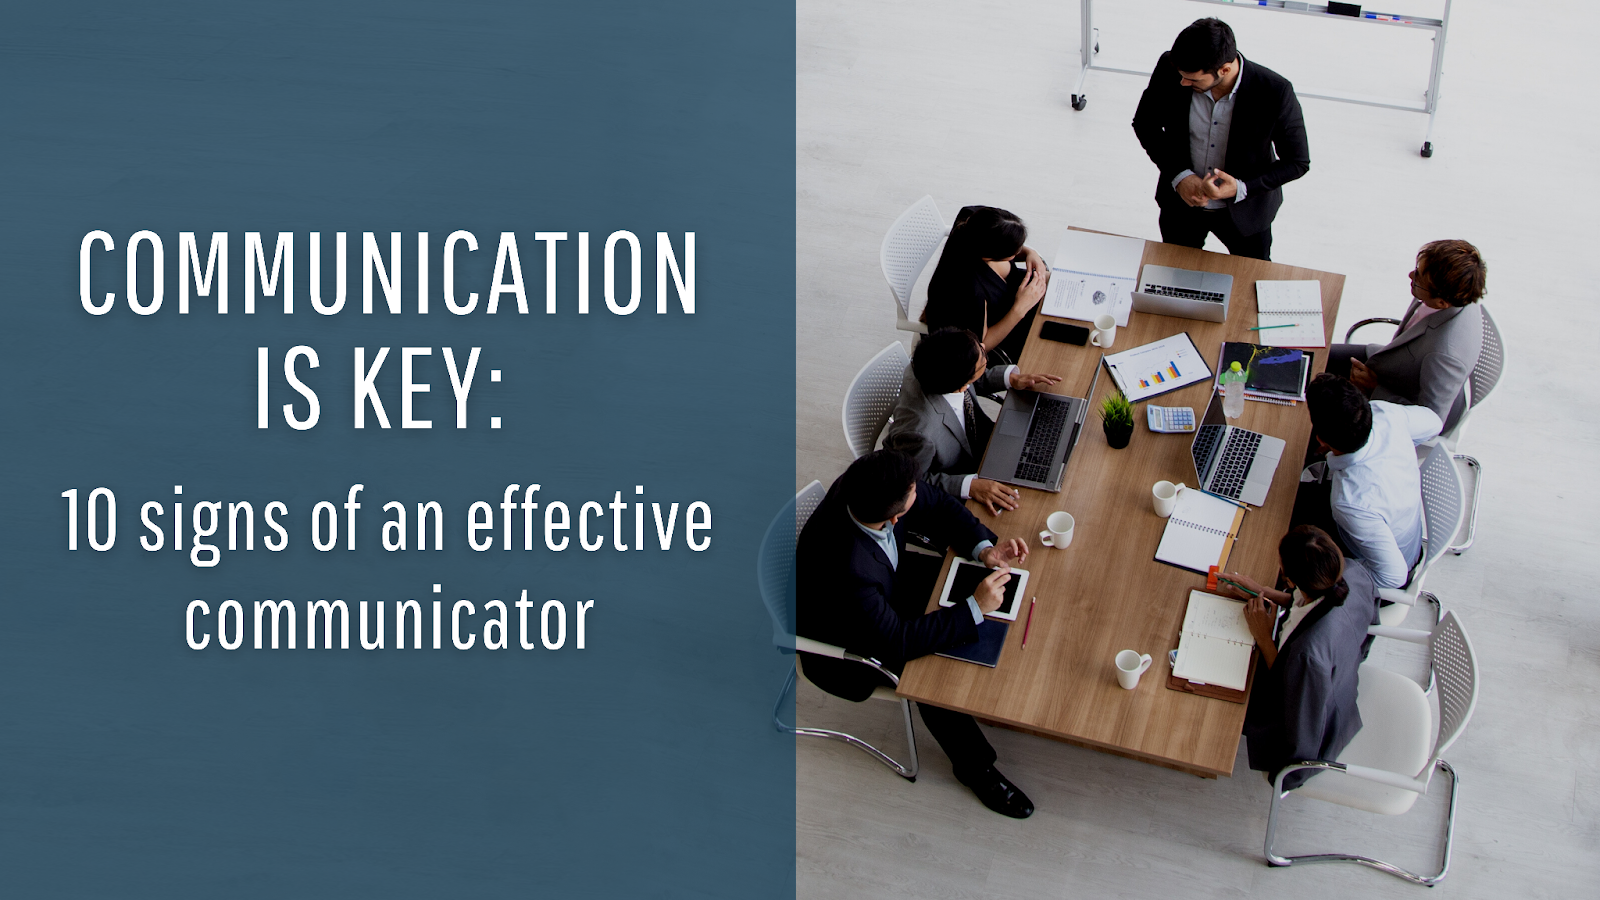 Communication is key: 10 signs of an effective communicator